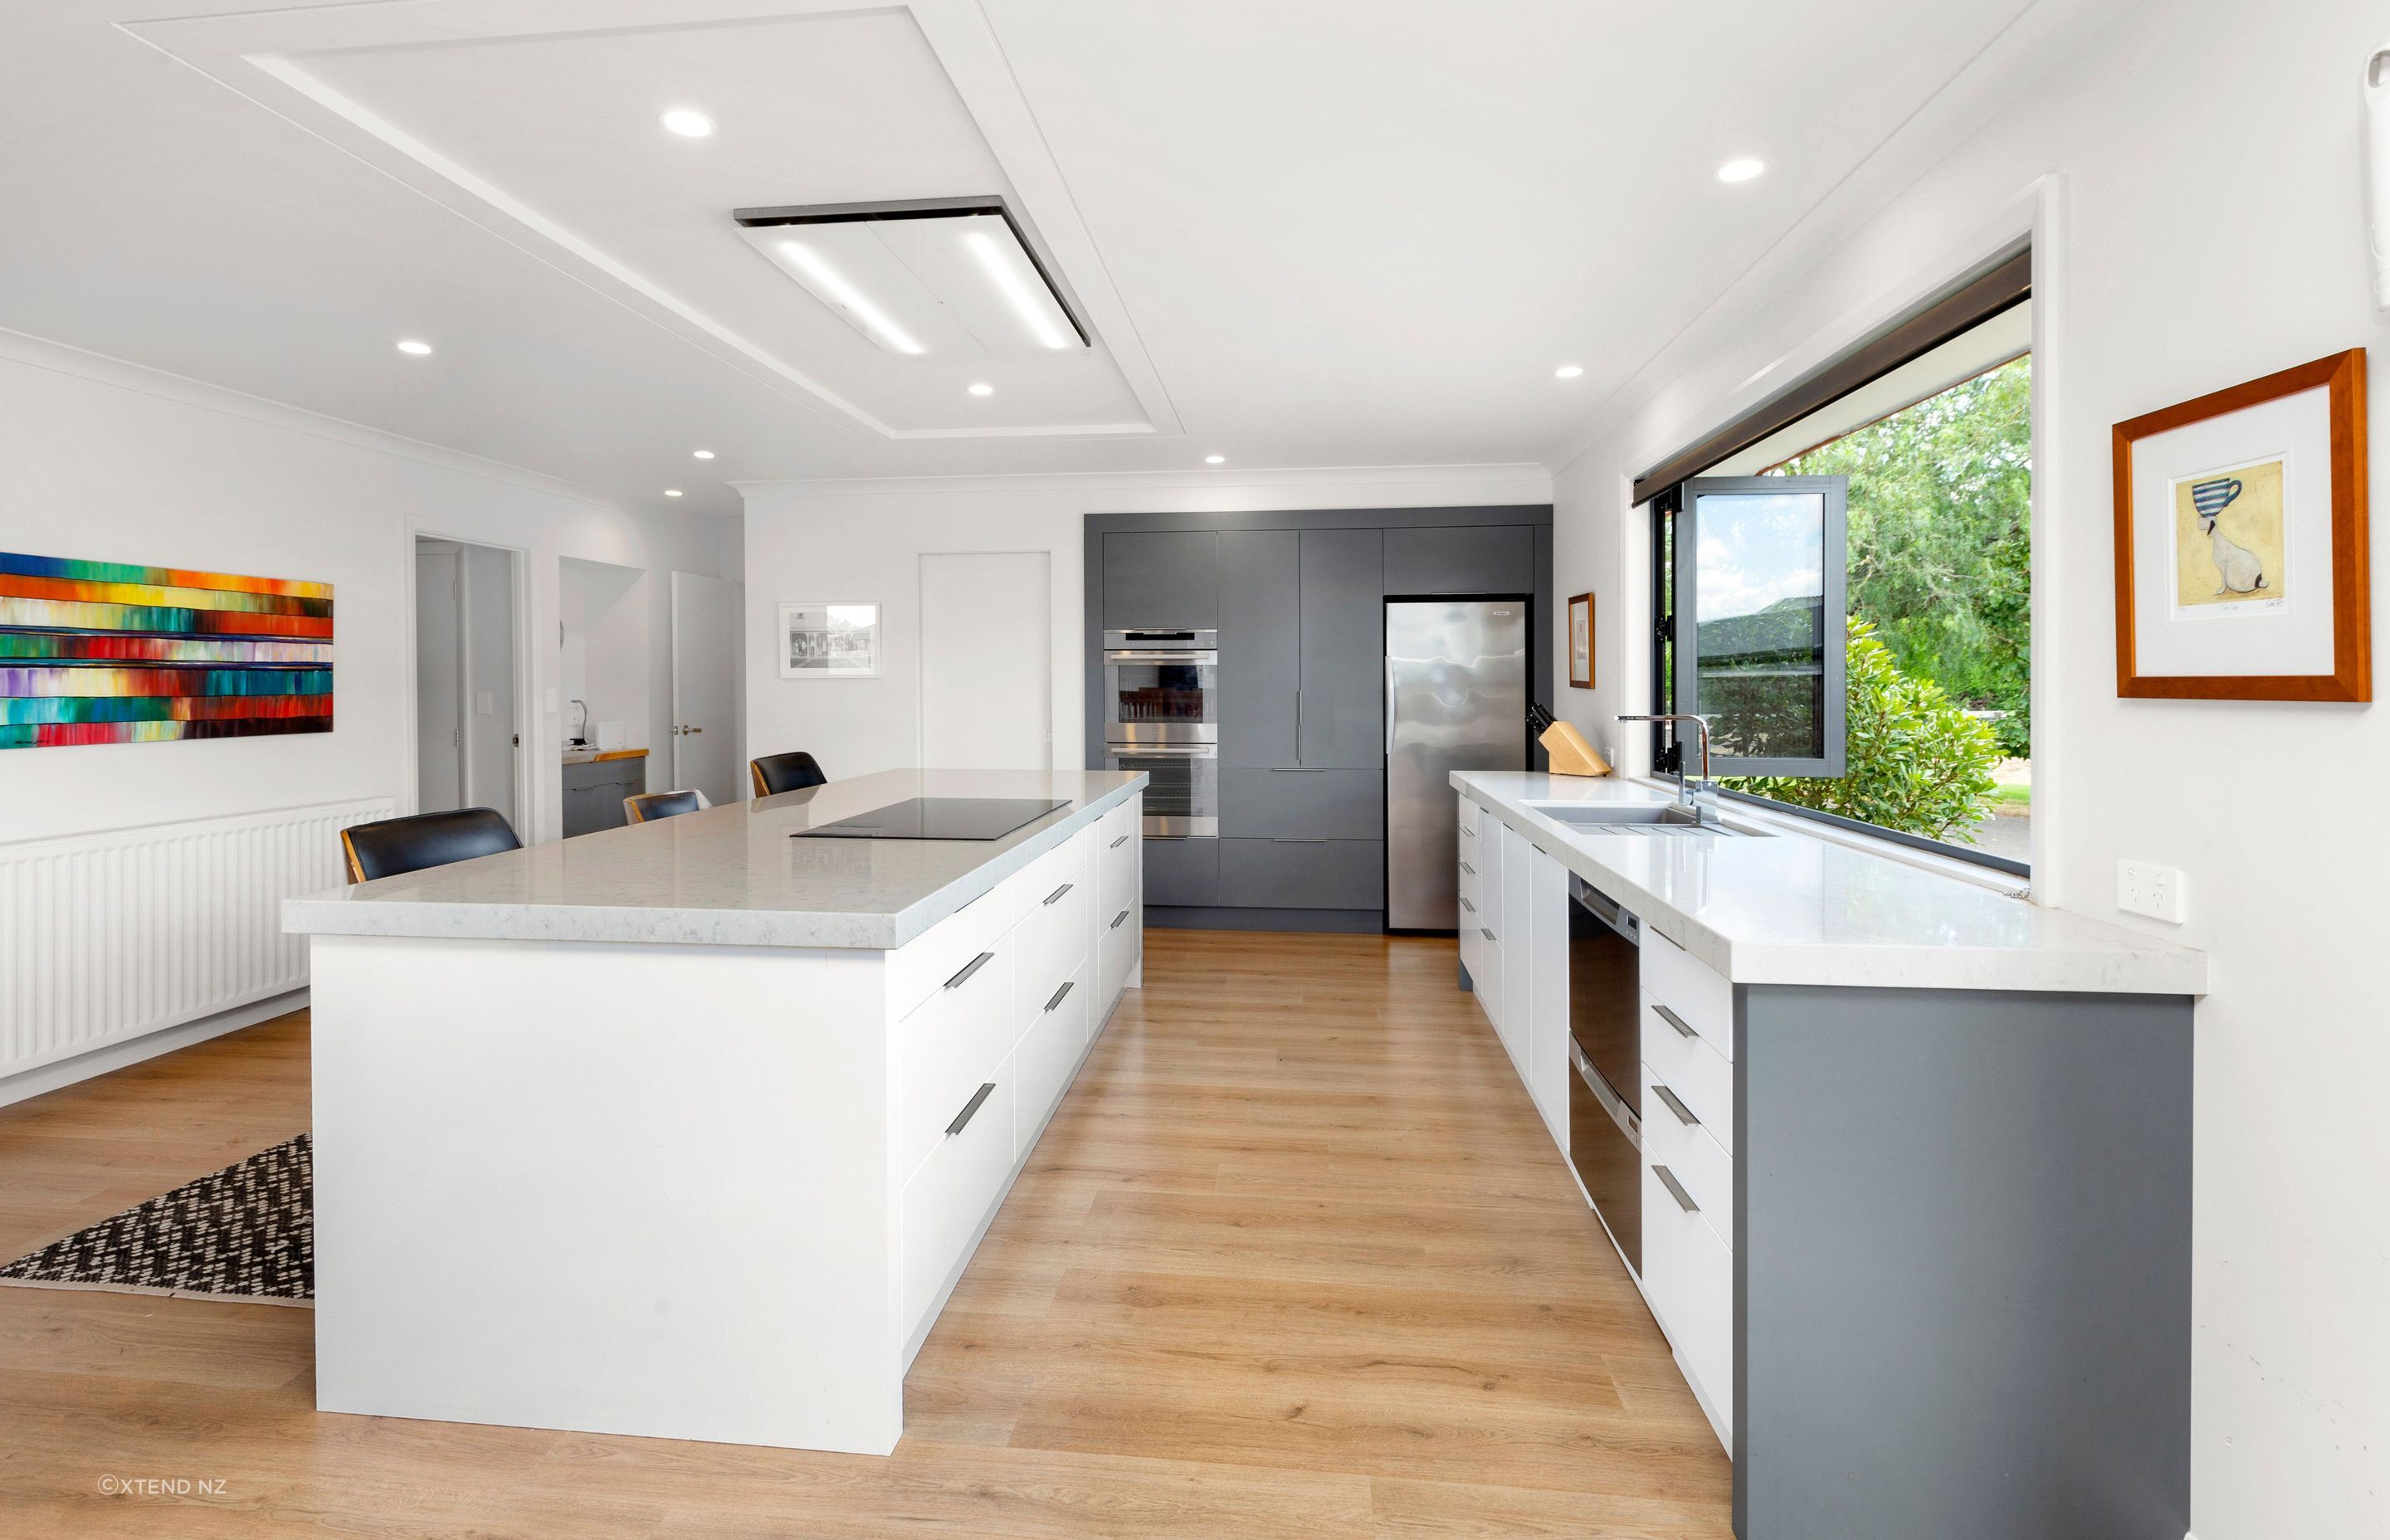 The open-plan kitchen has space to cook and entertain, with room for the whole family to gather and be together.